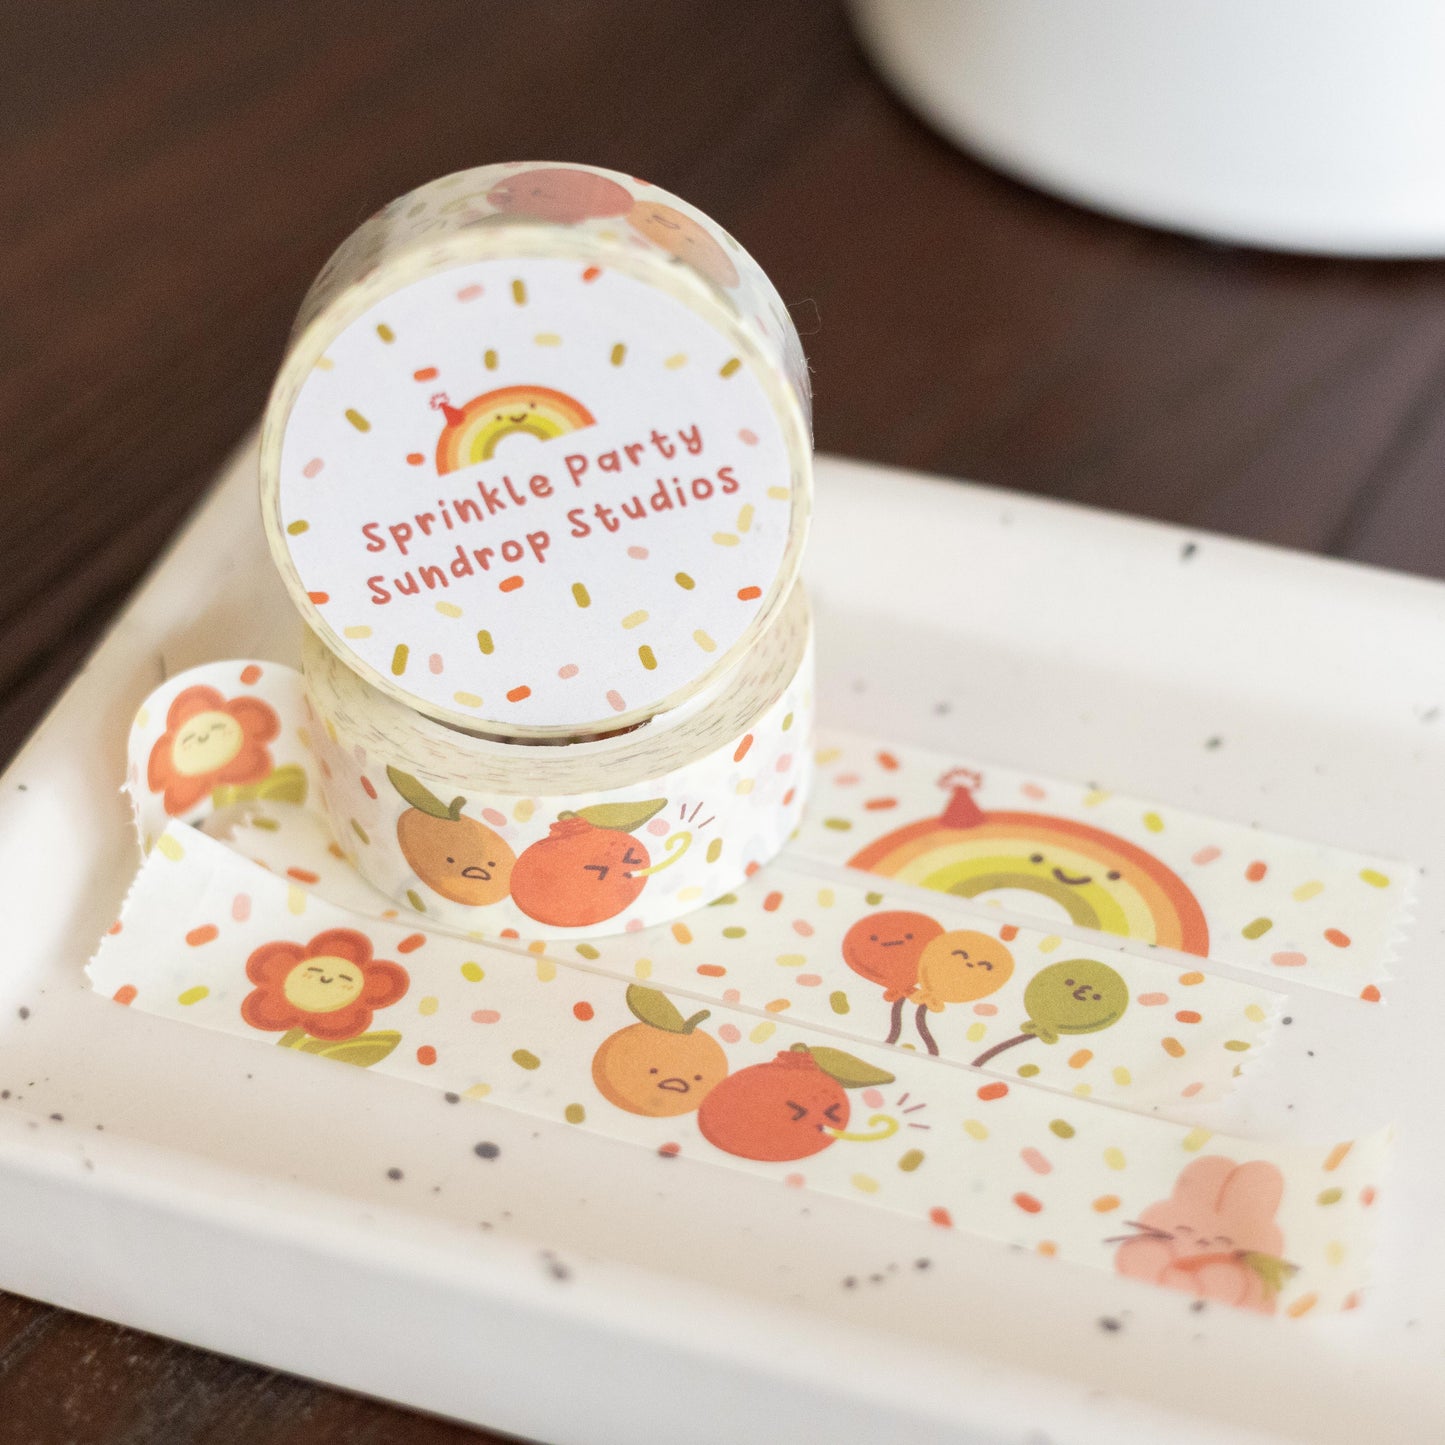 Sprinkle Party Washi Tape